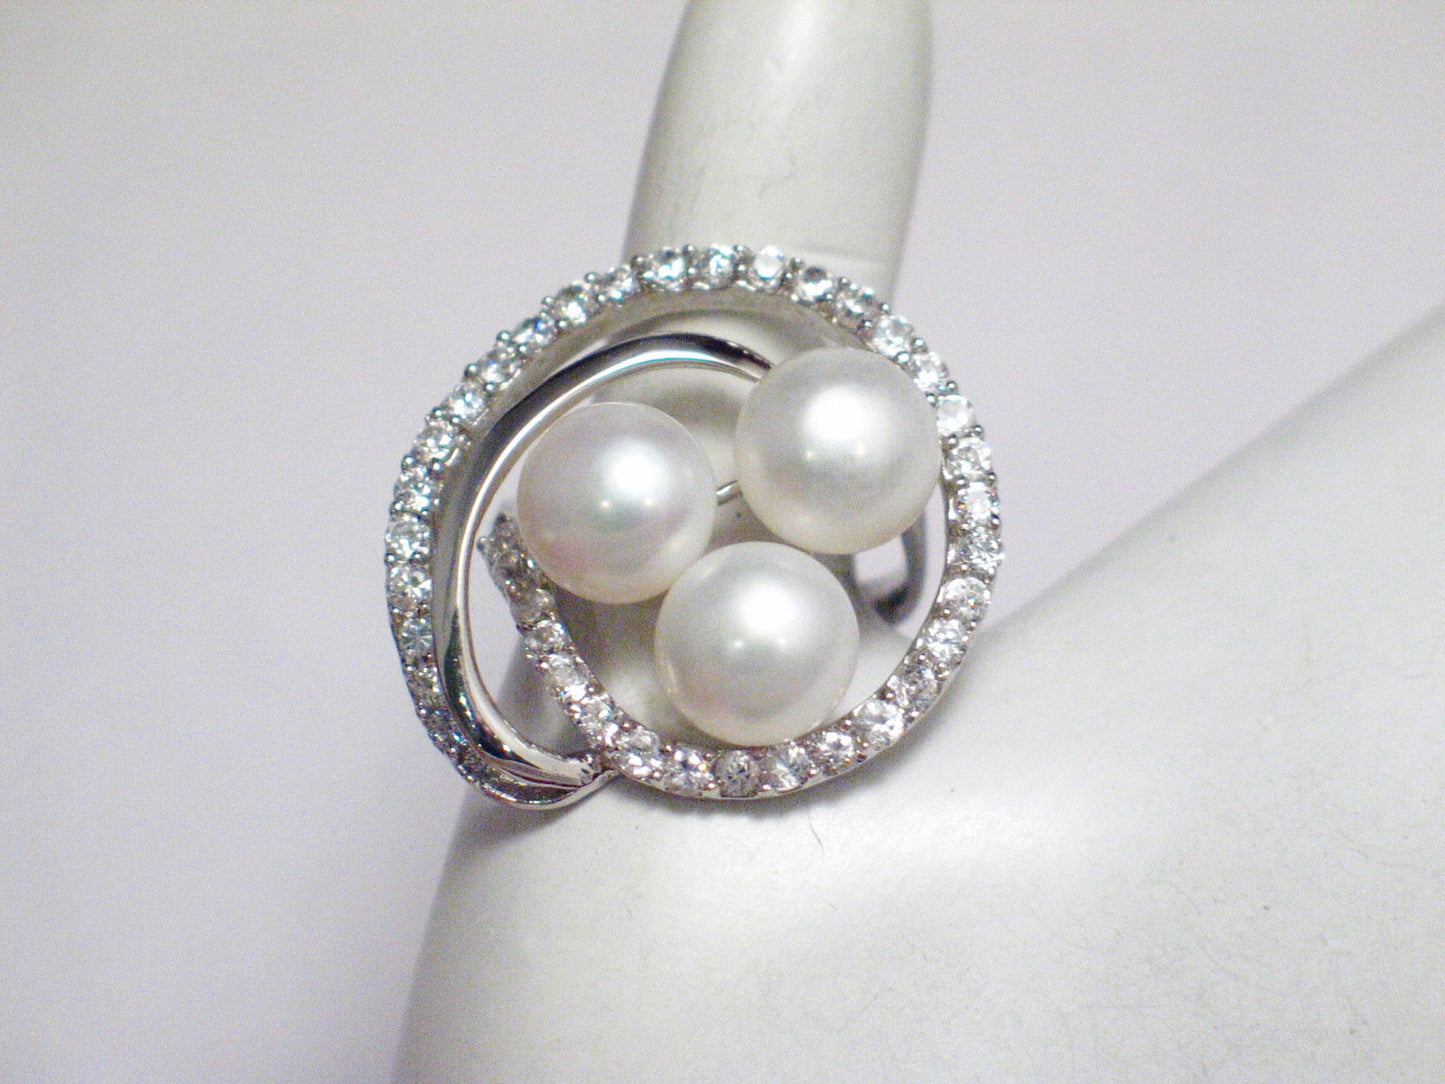 Ring | Womens Big Sterling Silver Glittery Cz & White Pearl Spiral Cocktail Ring  8.75 | Blingschlingers Jewelry